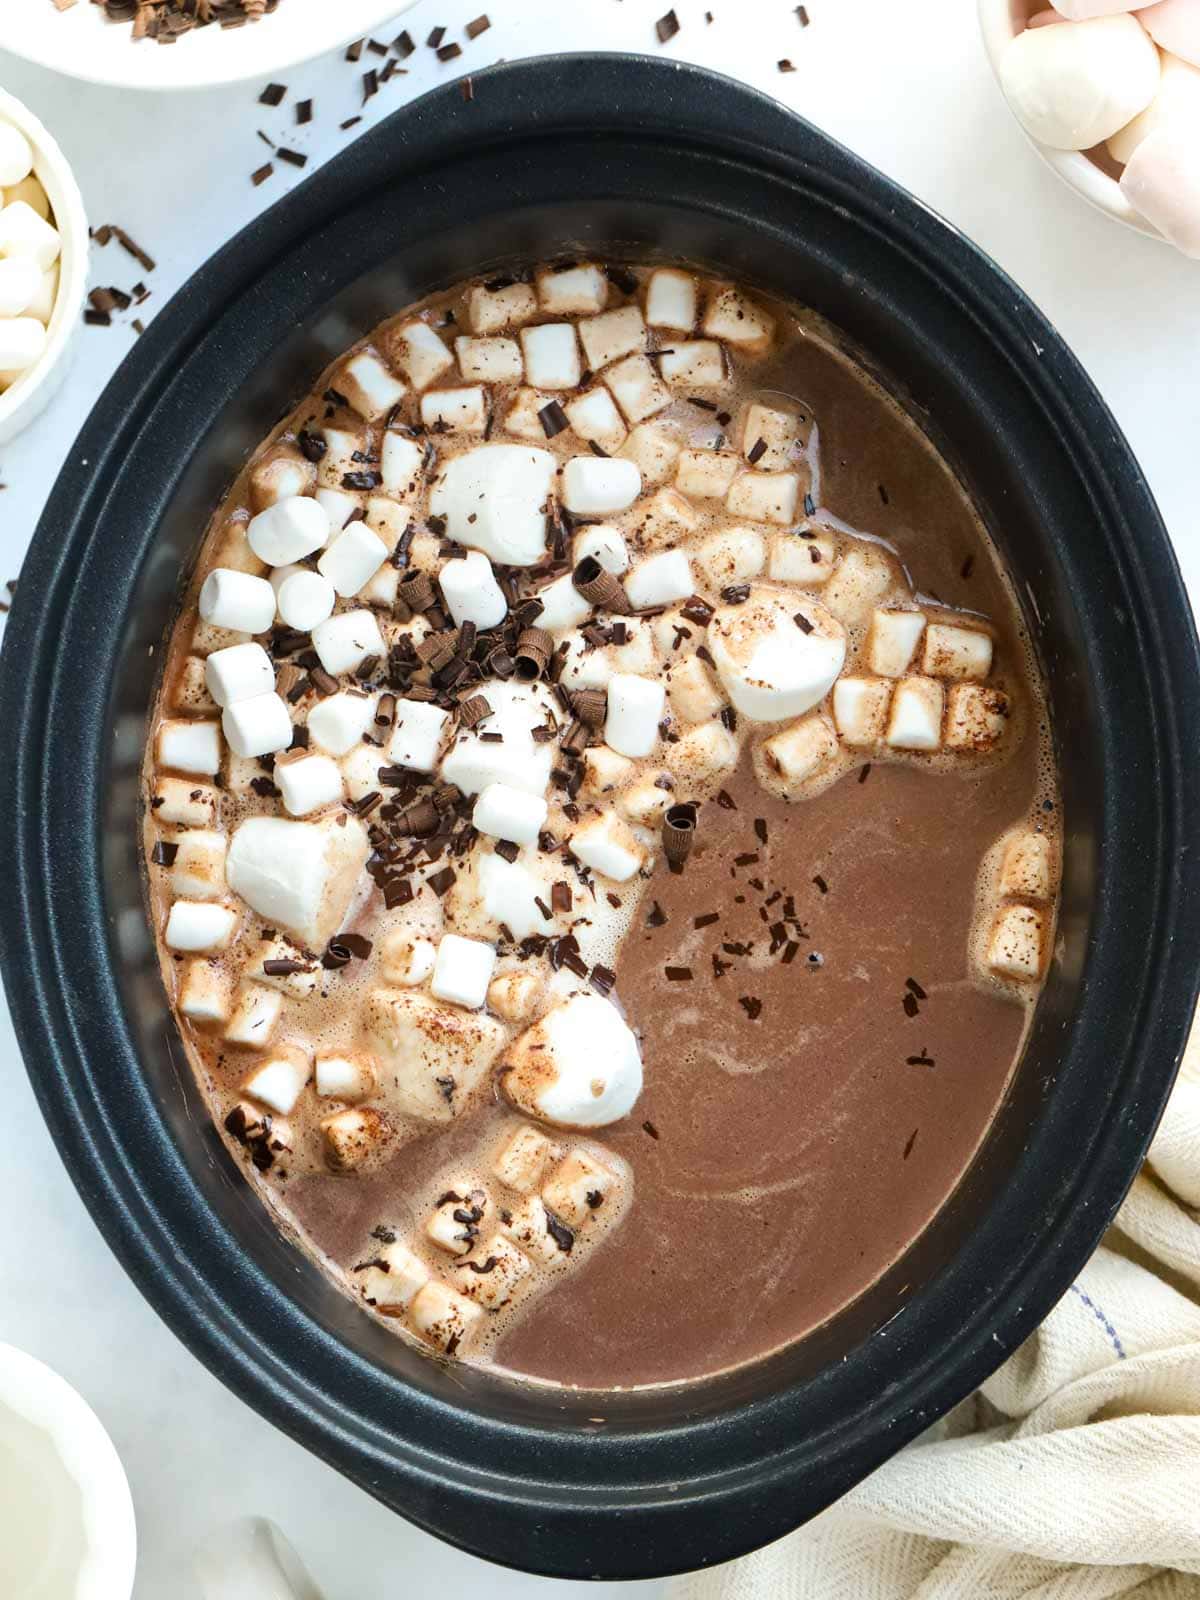 Slow Cooker Hot Chocolate topped with marshmallows and chocolate sprinkles.